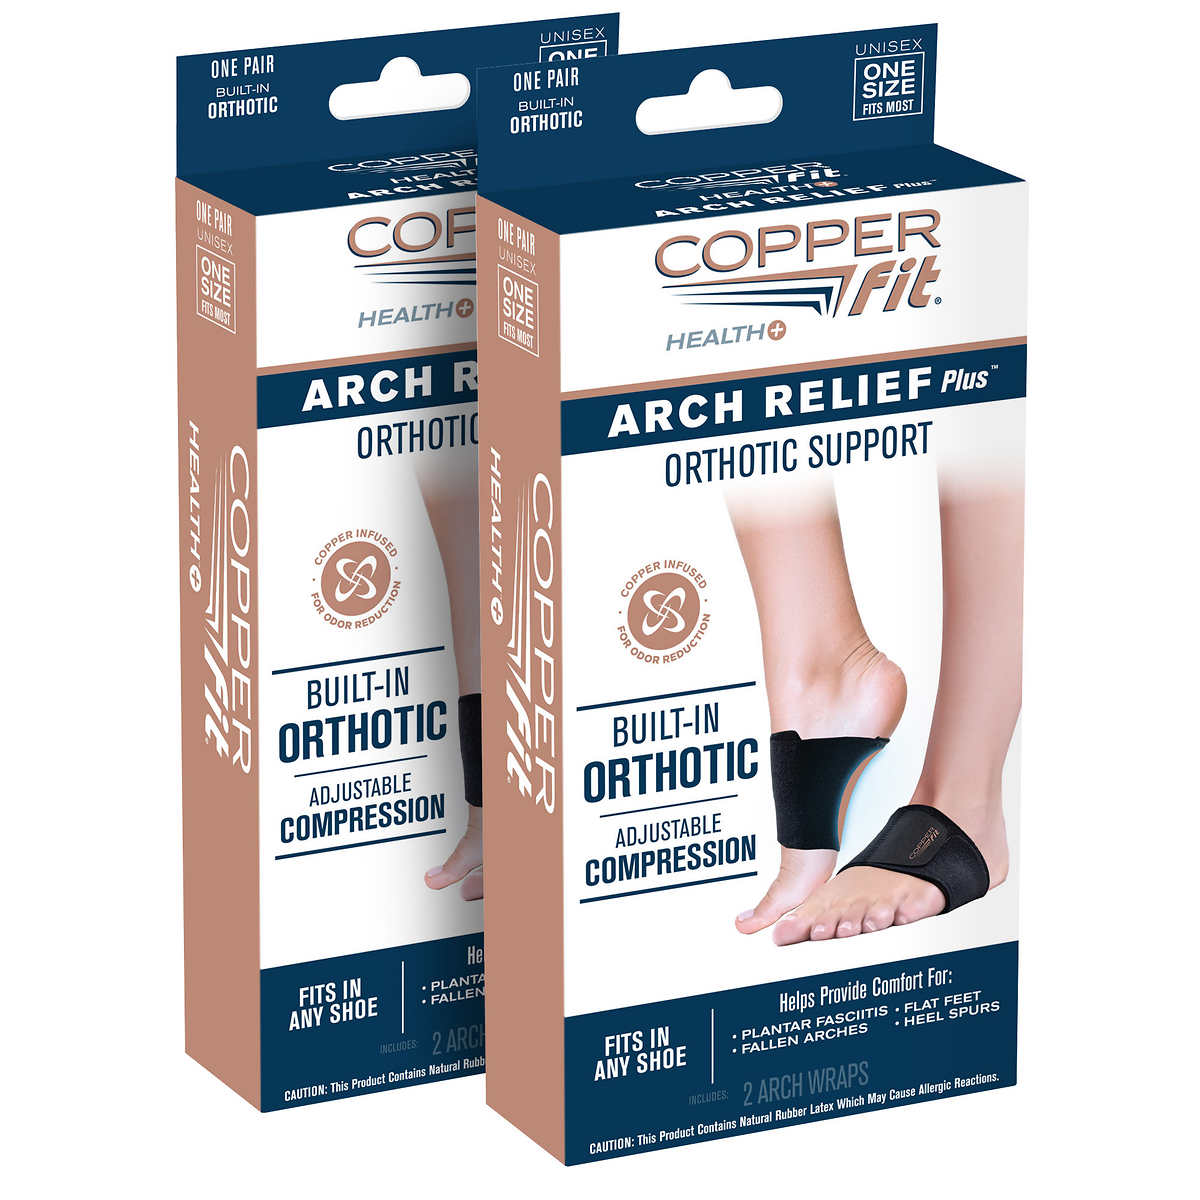 ABS Copper Fit Men's Rapid Relief Back With Hot/Cold Therapy in